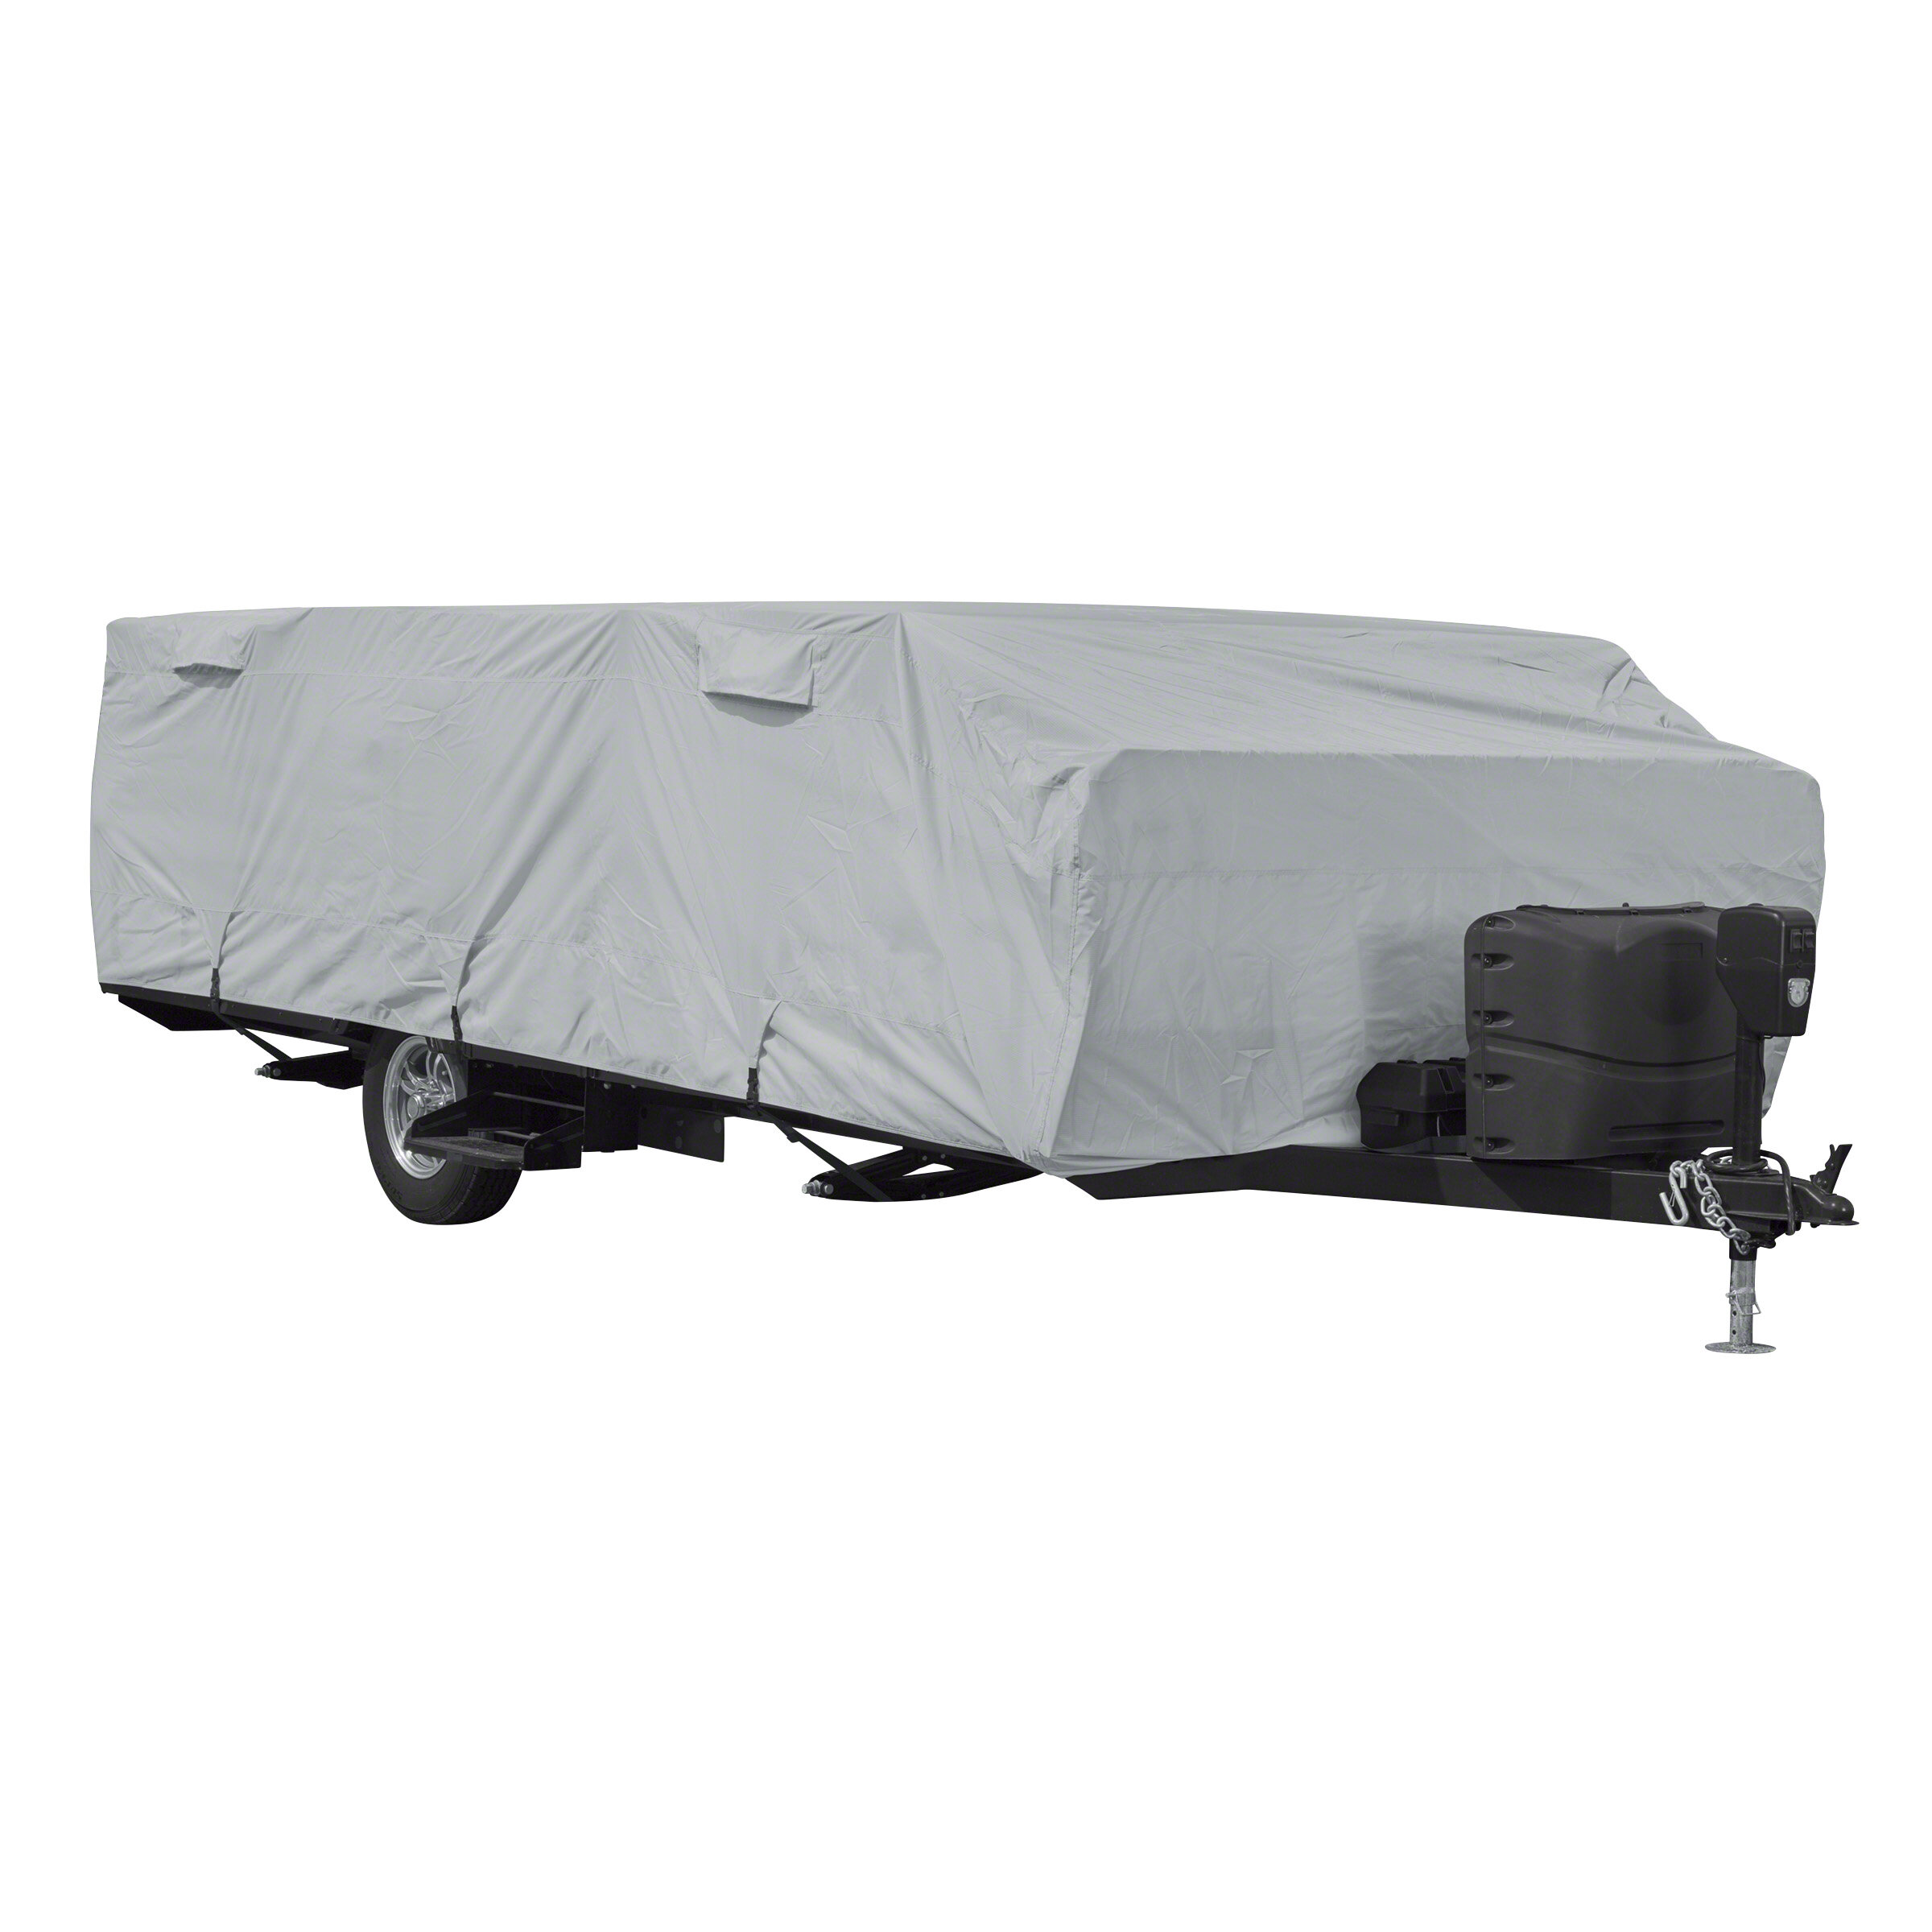 Classic Accessories PermaPRO, Best Class B RV Covers for Sale